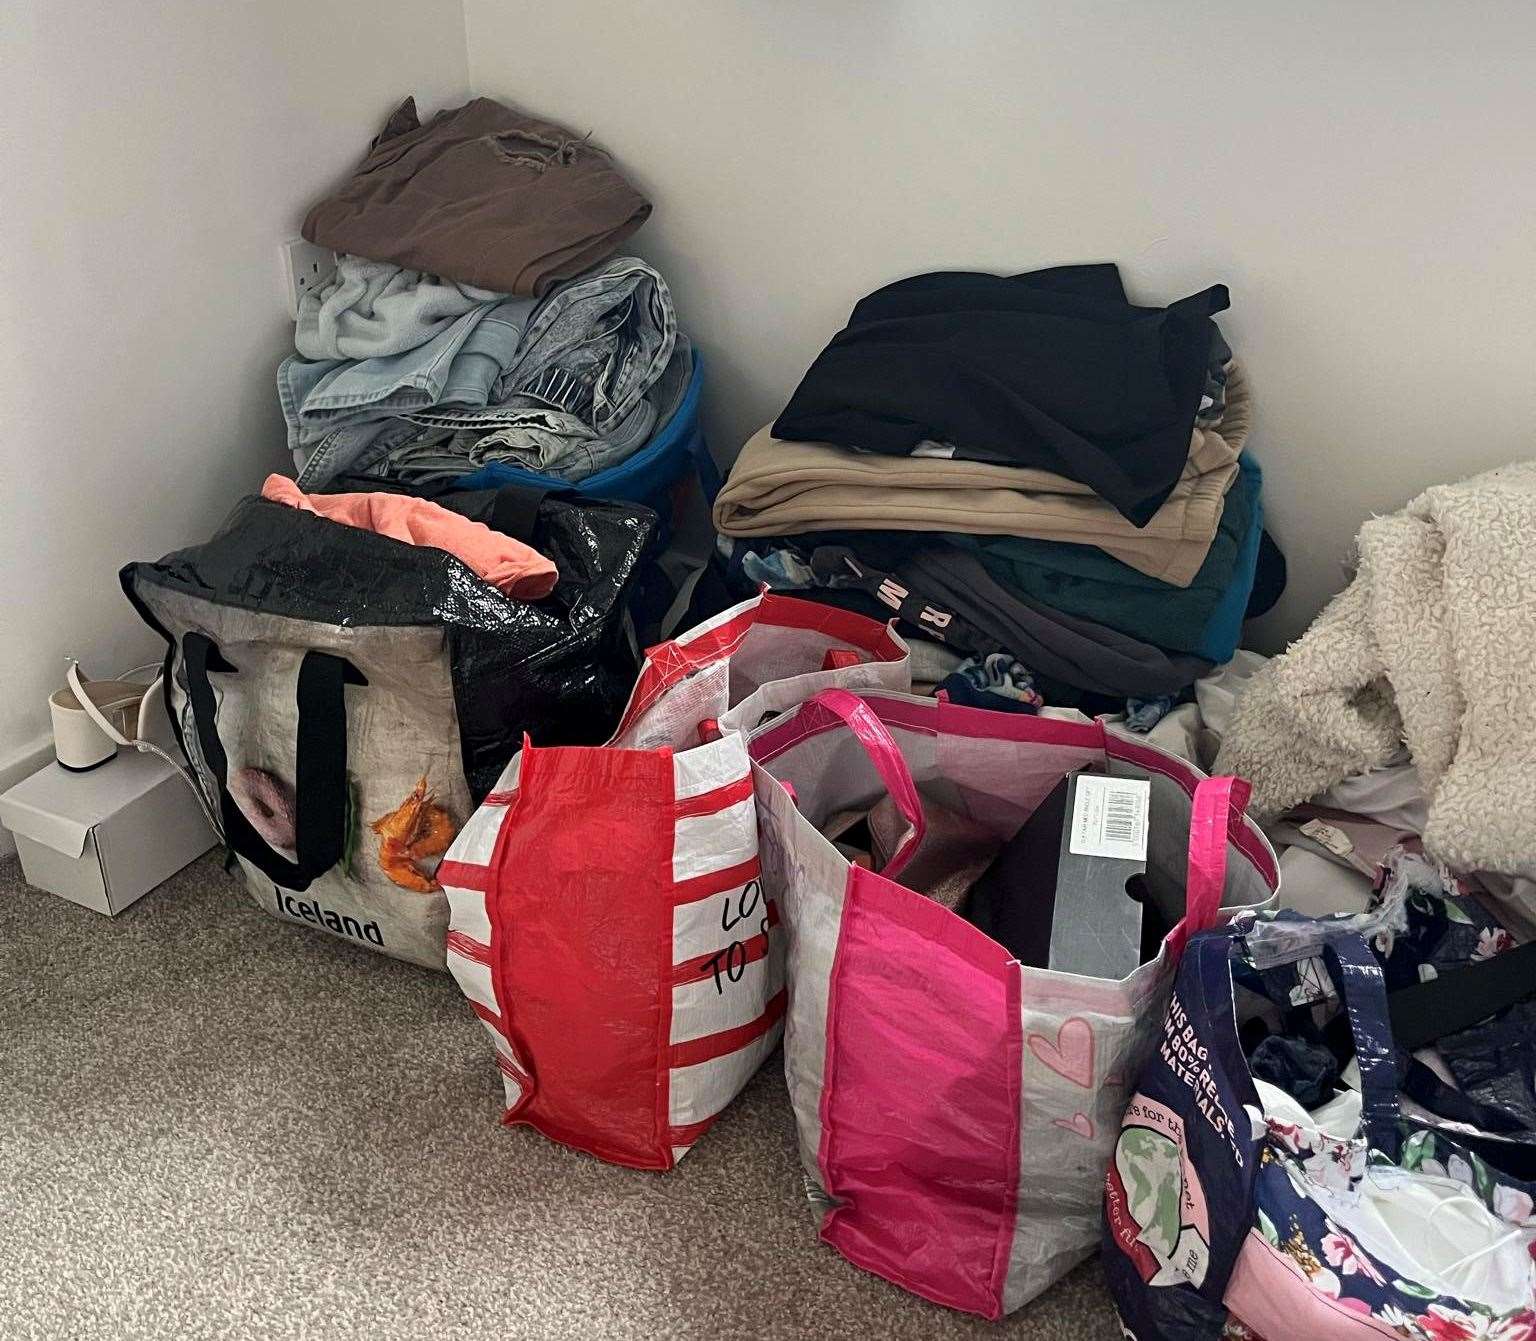 Allana’s belongings have been packed up and moved. Picture: Allana Spencer